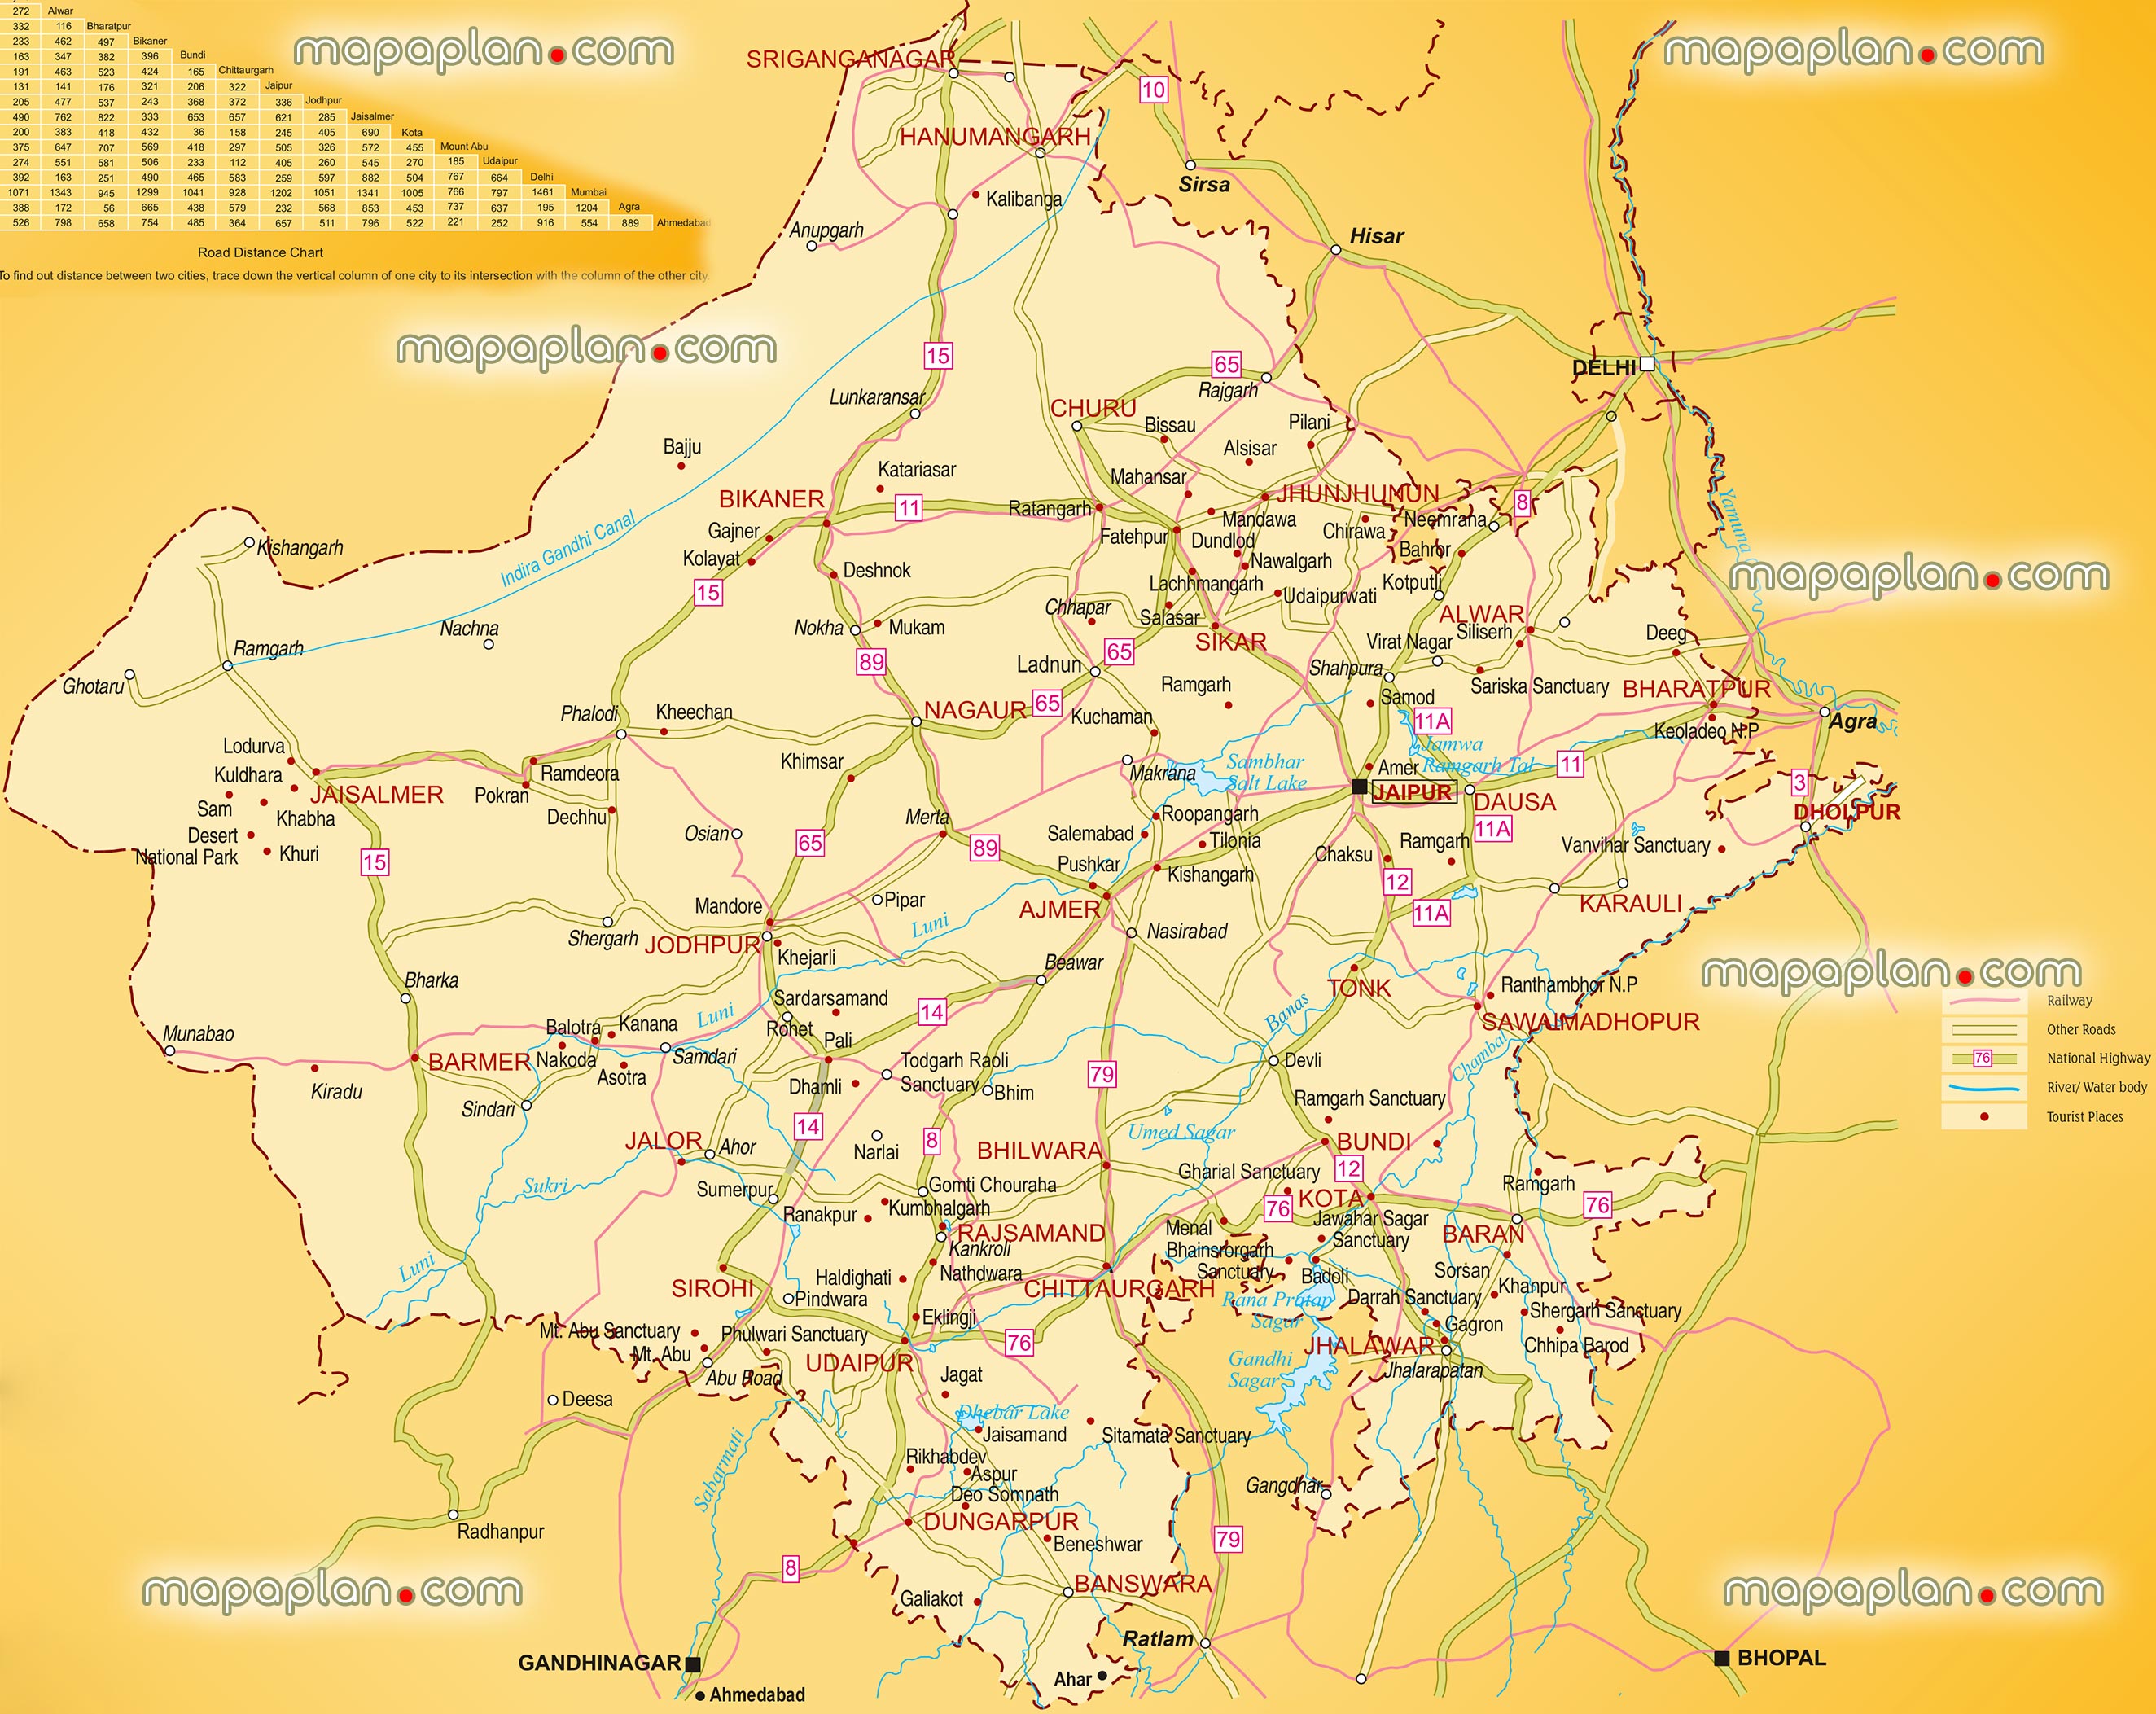 rajasthan region india detailed distances between cities towns villages suburbs metropolitan areas interactive itinerary planner list cities visit see detailed road around central areas driving directions famous points interest printable detailed travel visitors itinerary planner best places visits Jaipur Top tourist attractions map